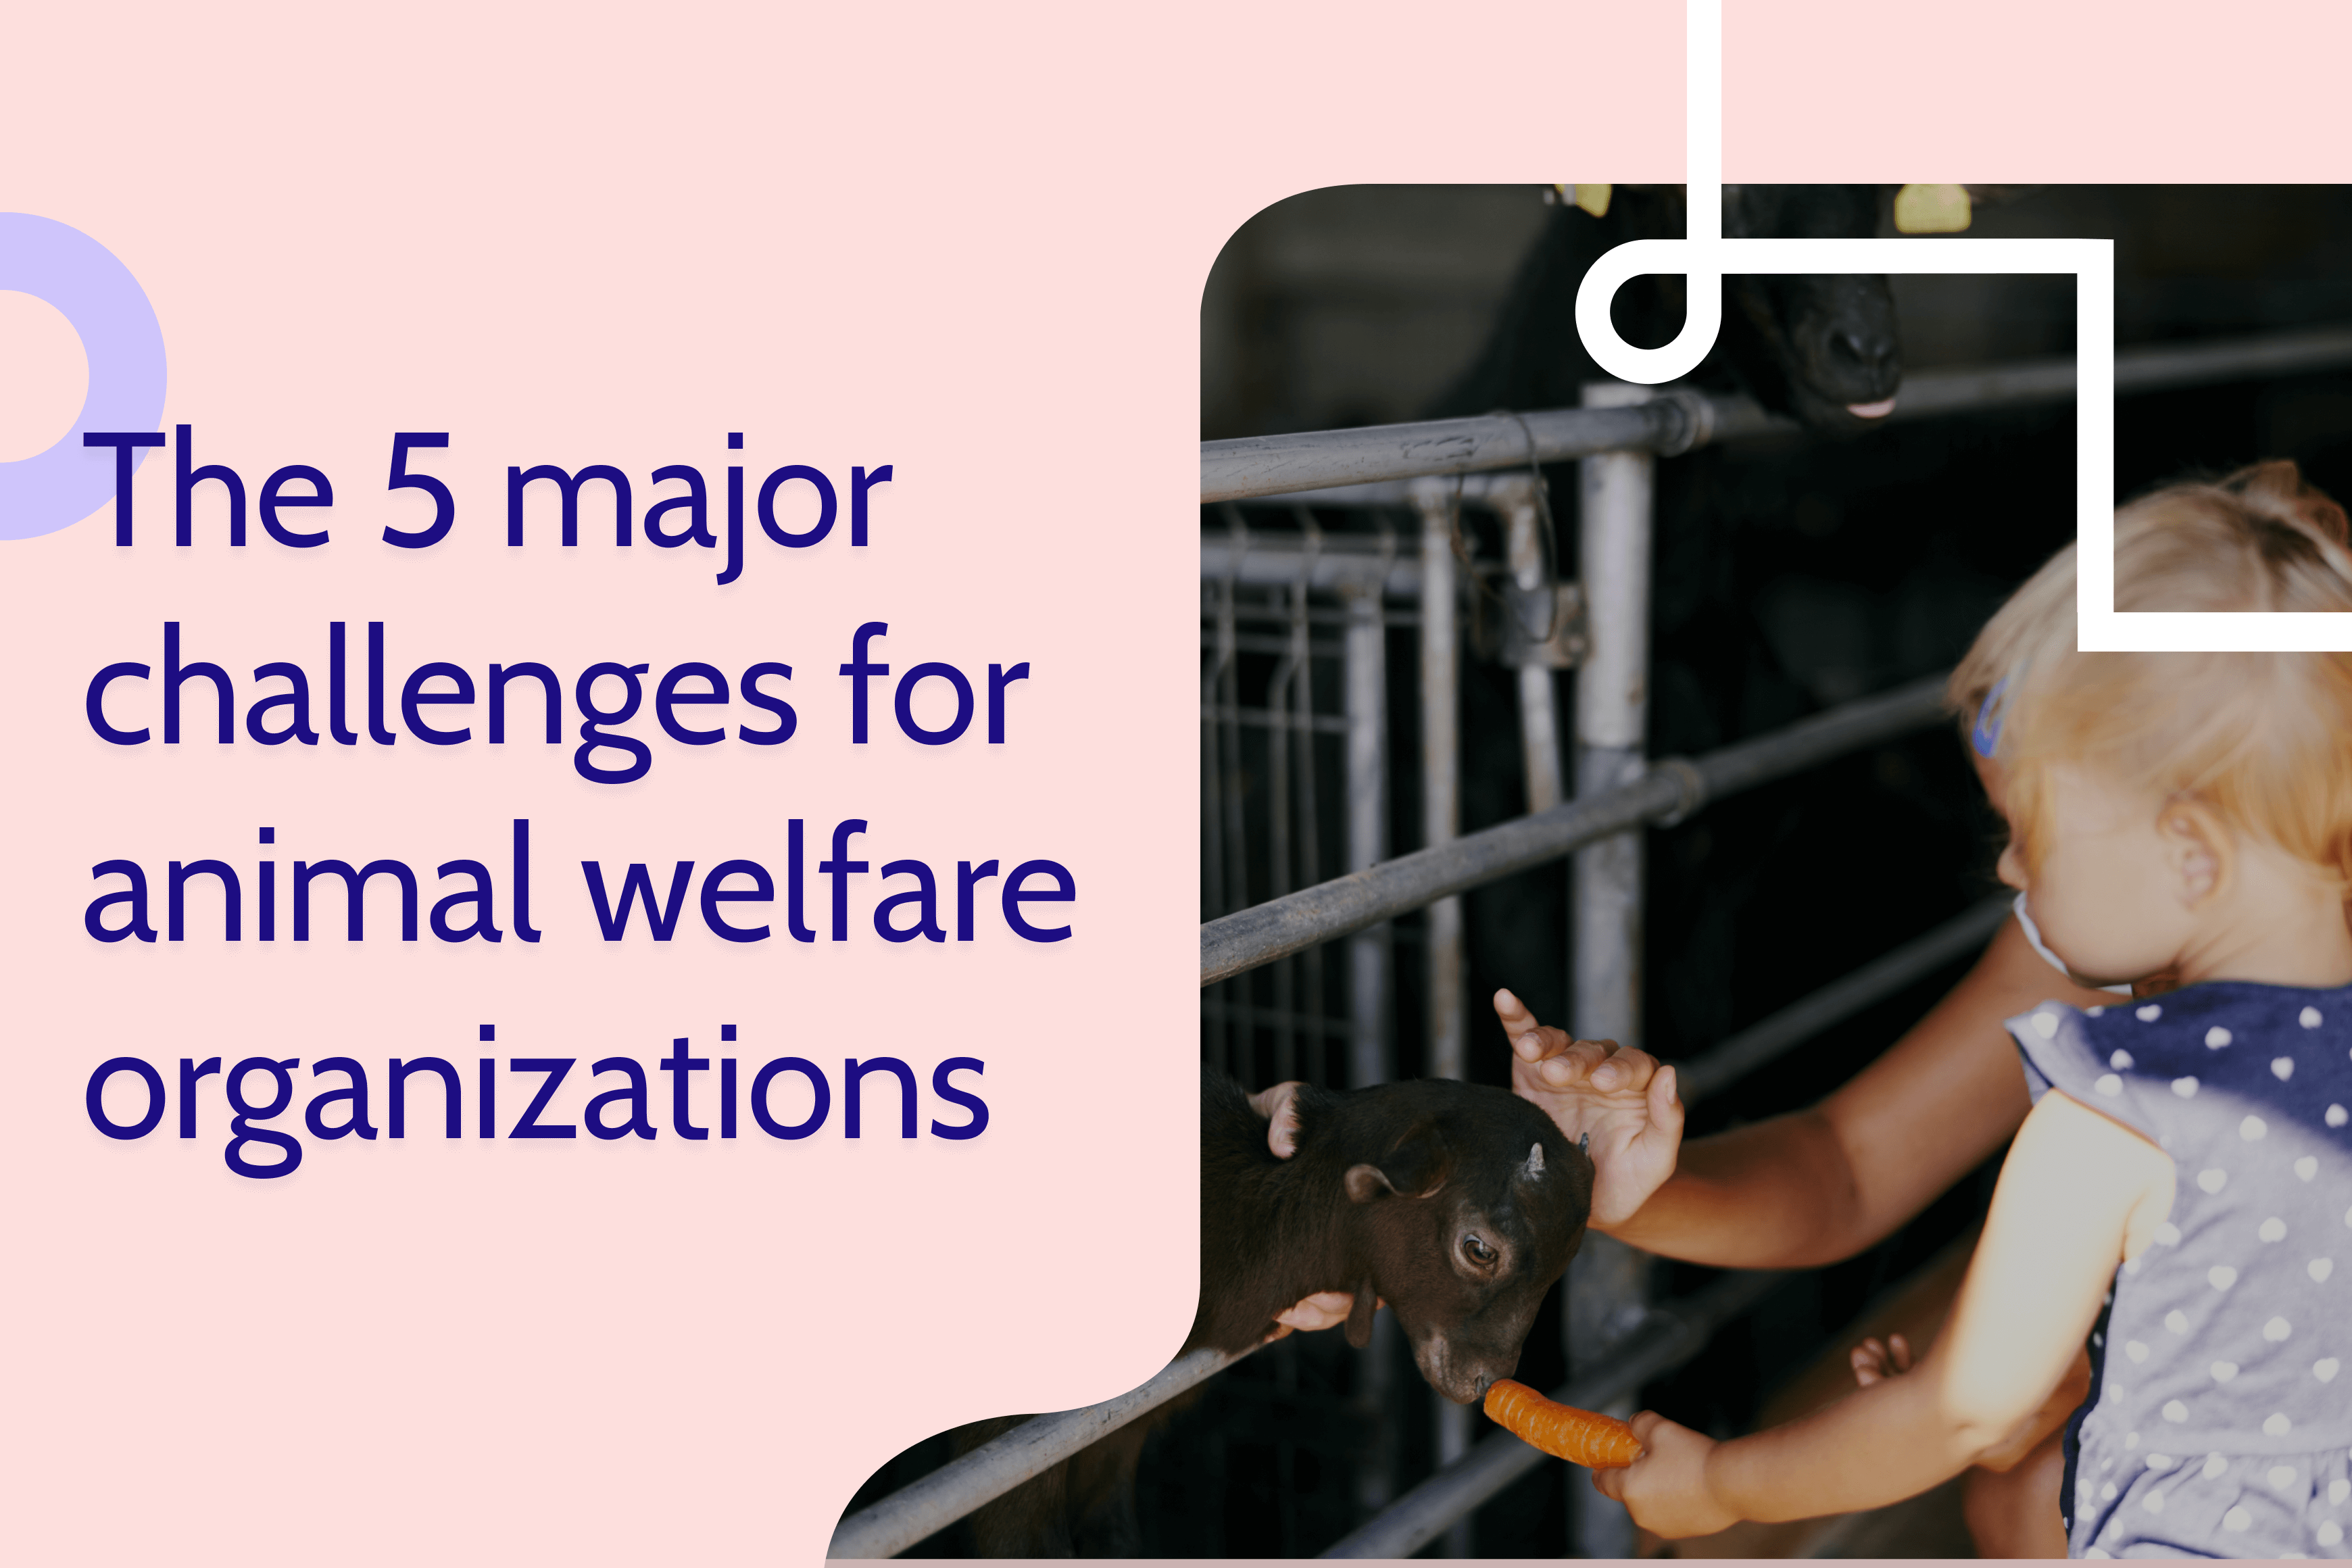 The 5 major challenges for animal welfare organizations